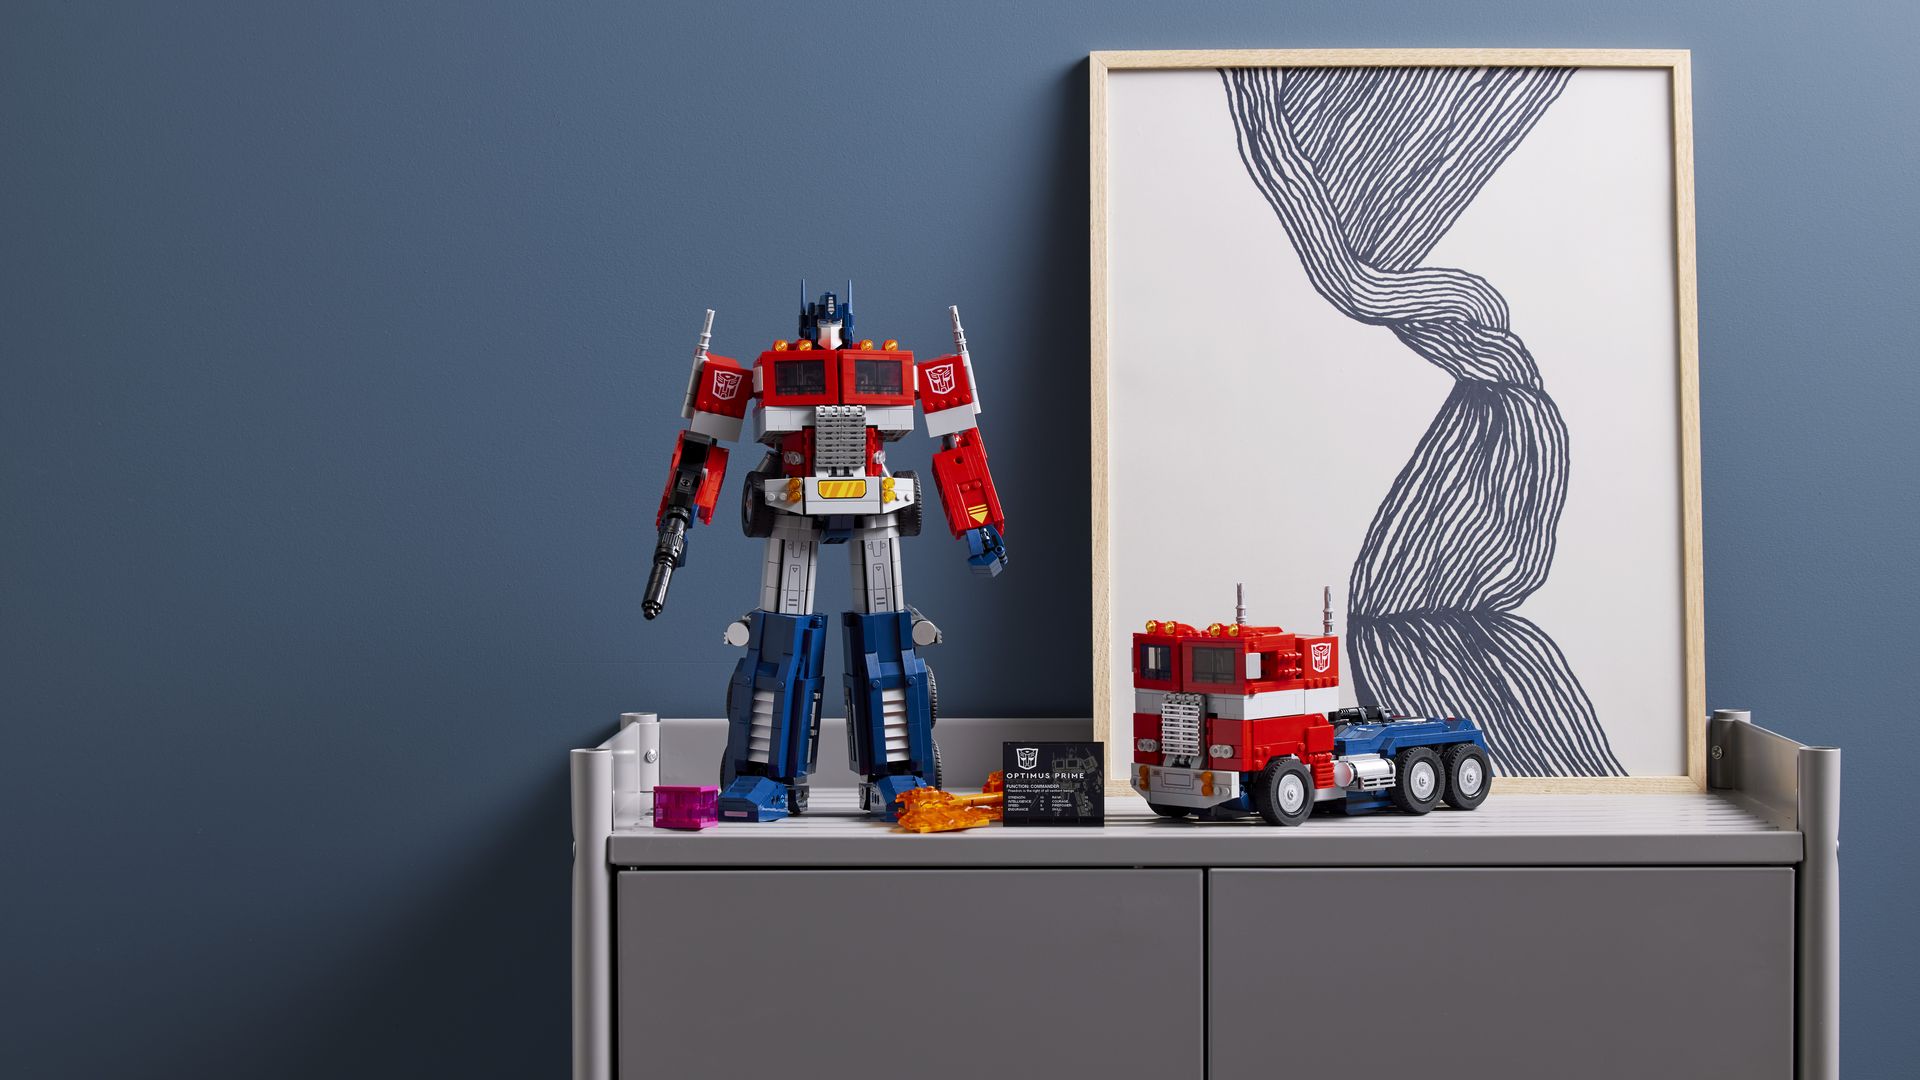 The new Lego version of Optimus Prime, with the Transformer shown in both robot and truck form.